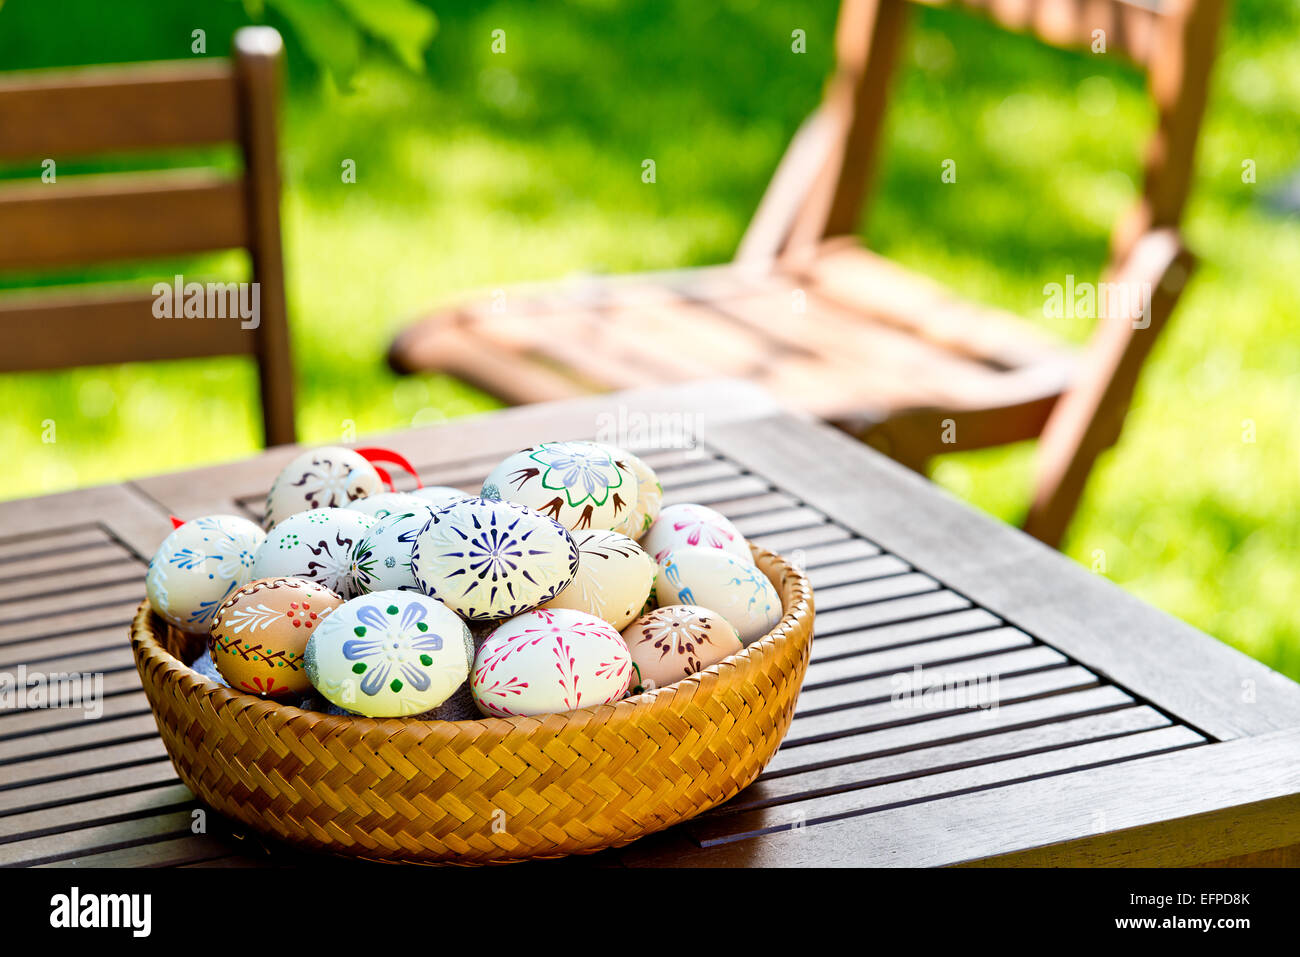 Colored Easter eggs on the desk in the garden Stock Photo